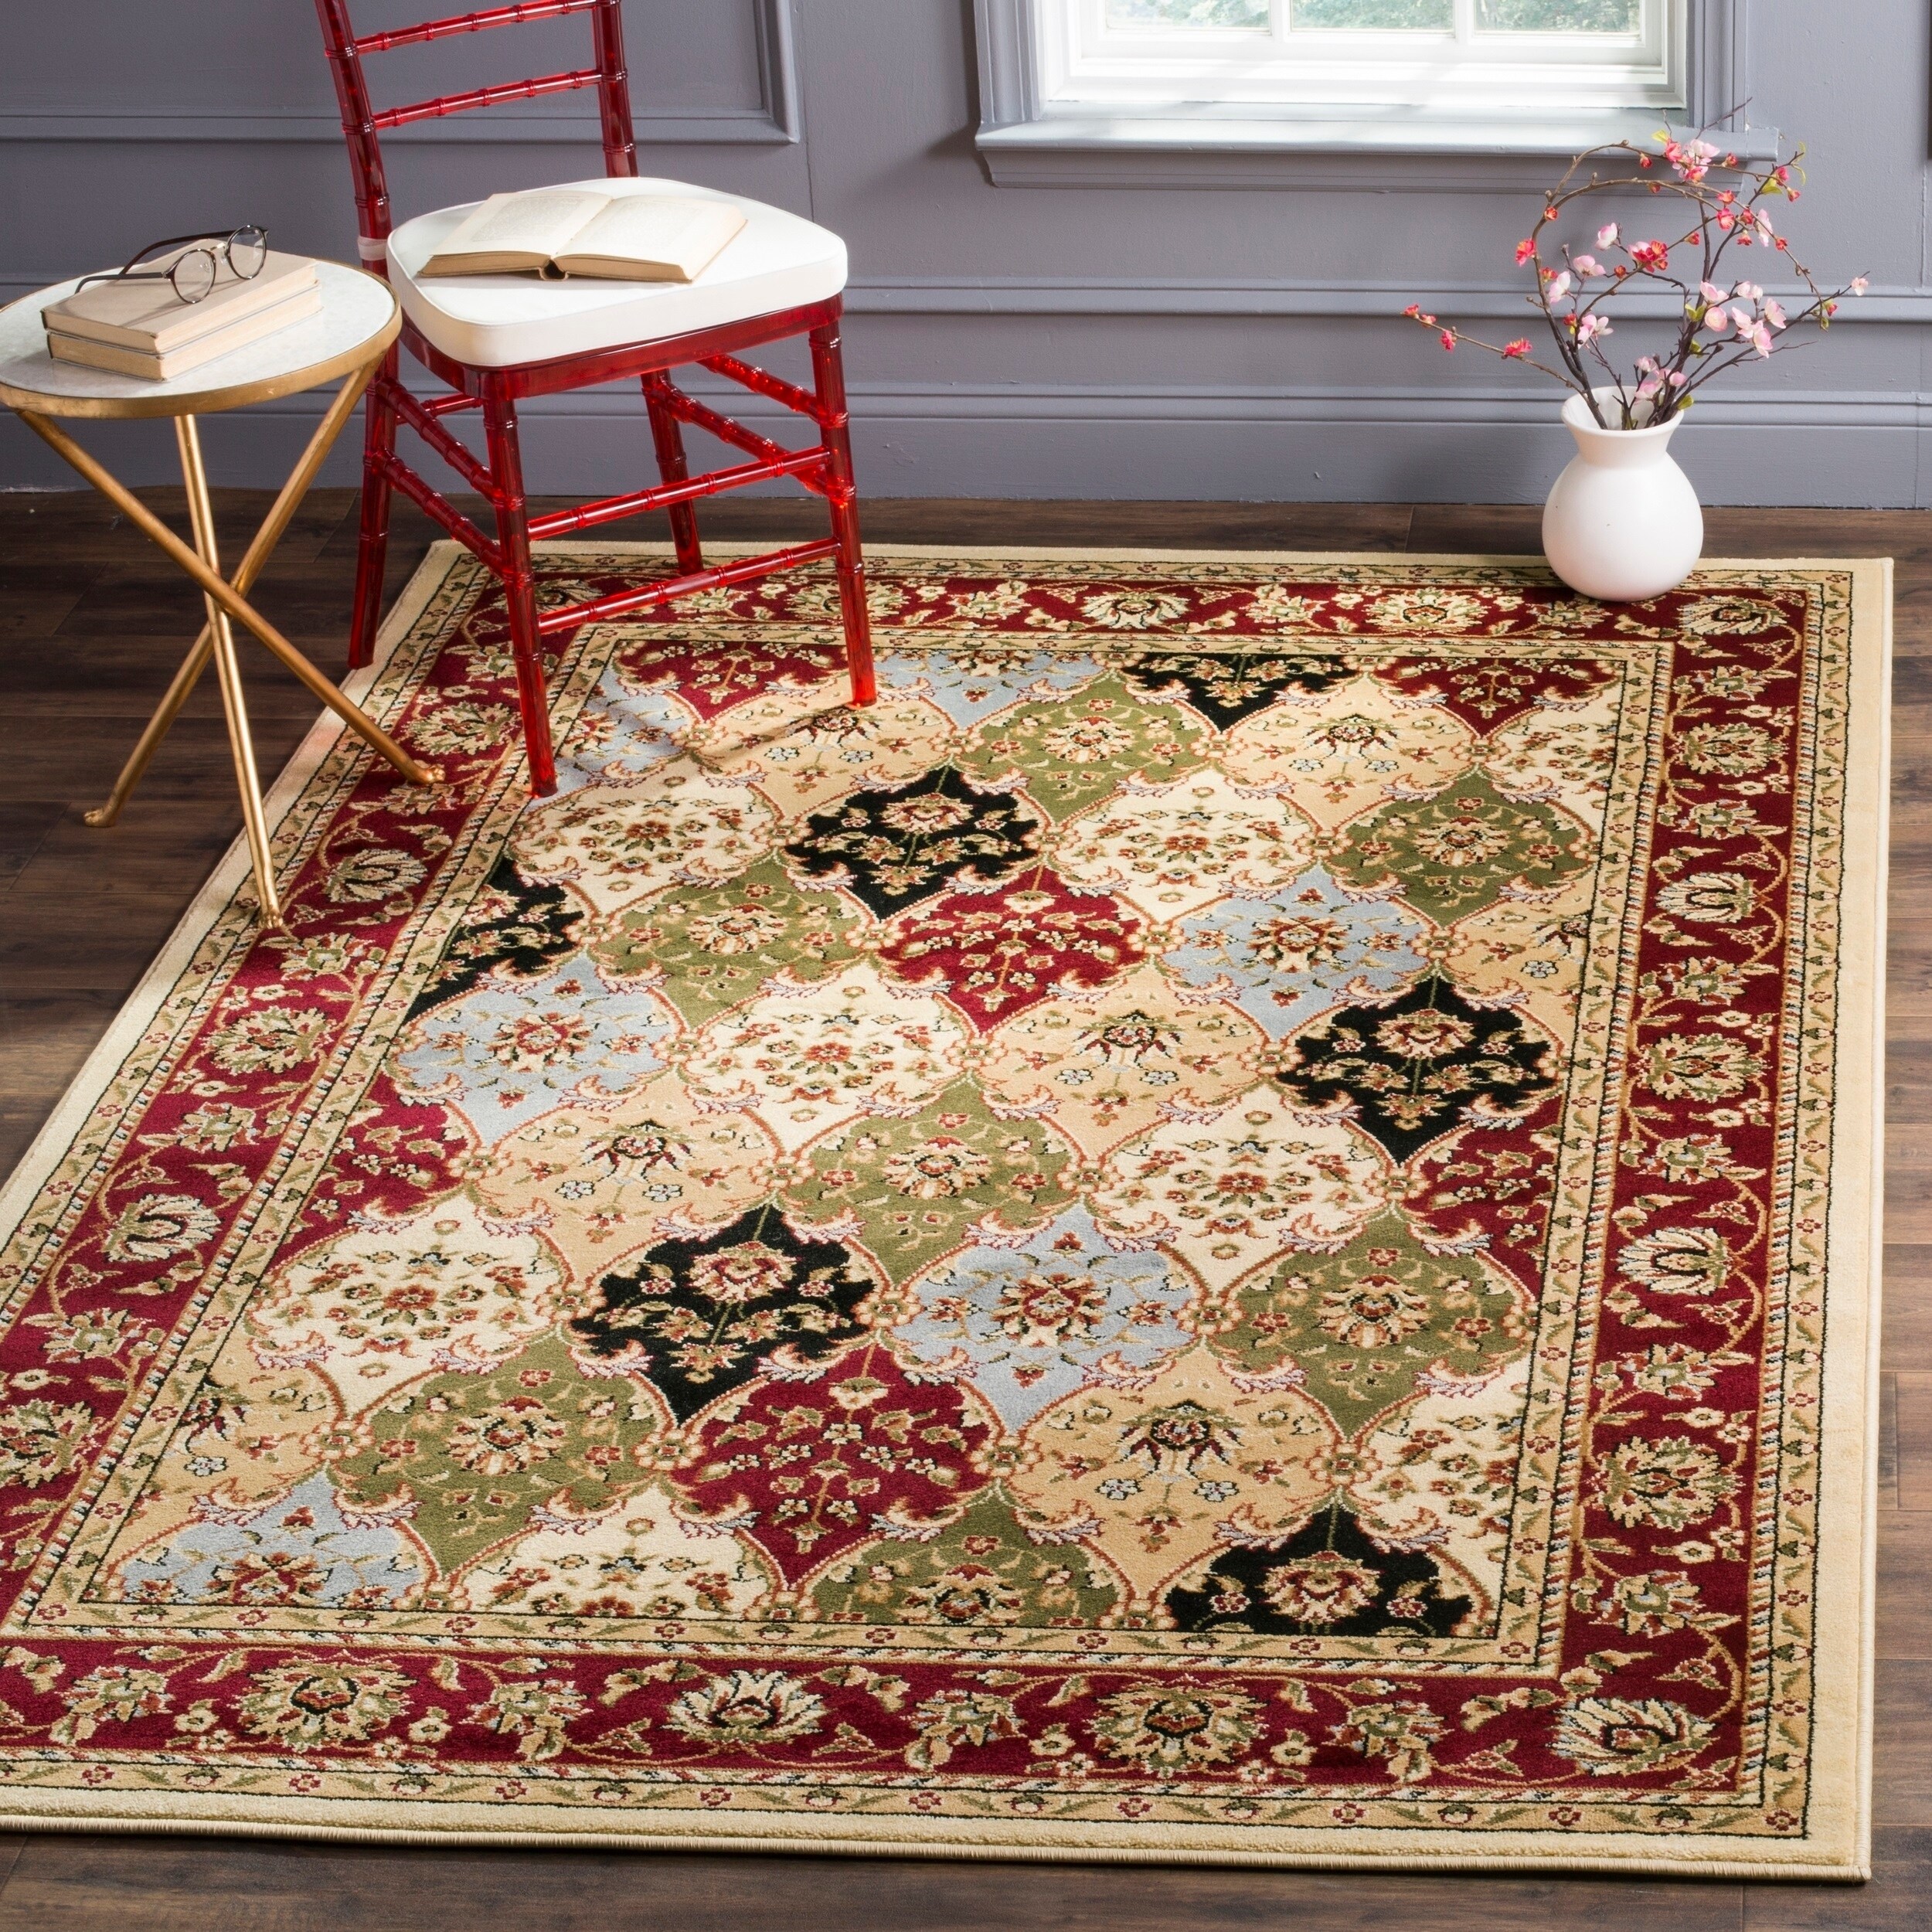 Lyndhurst Collection Multicolor/ Red Rug (4 X 6)